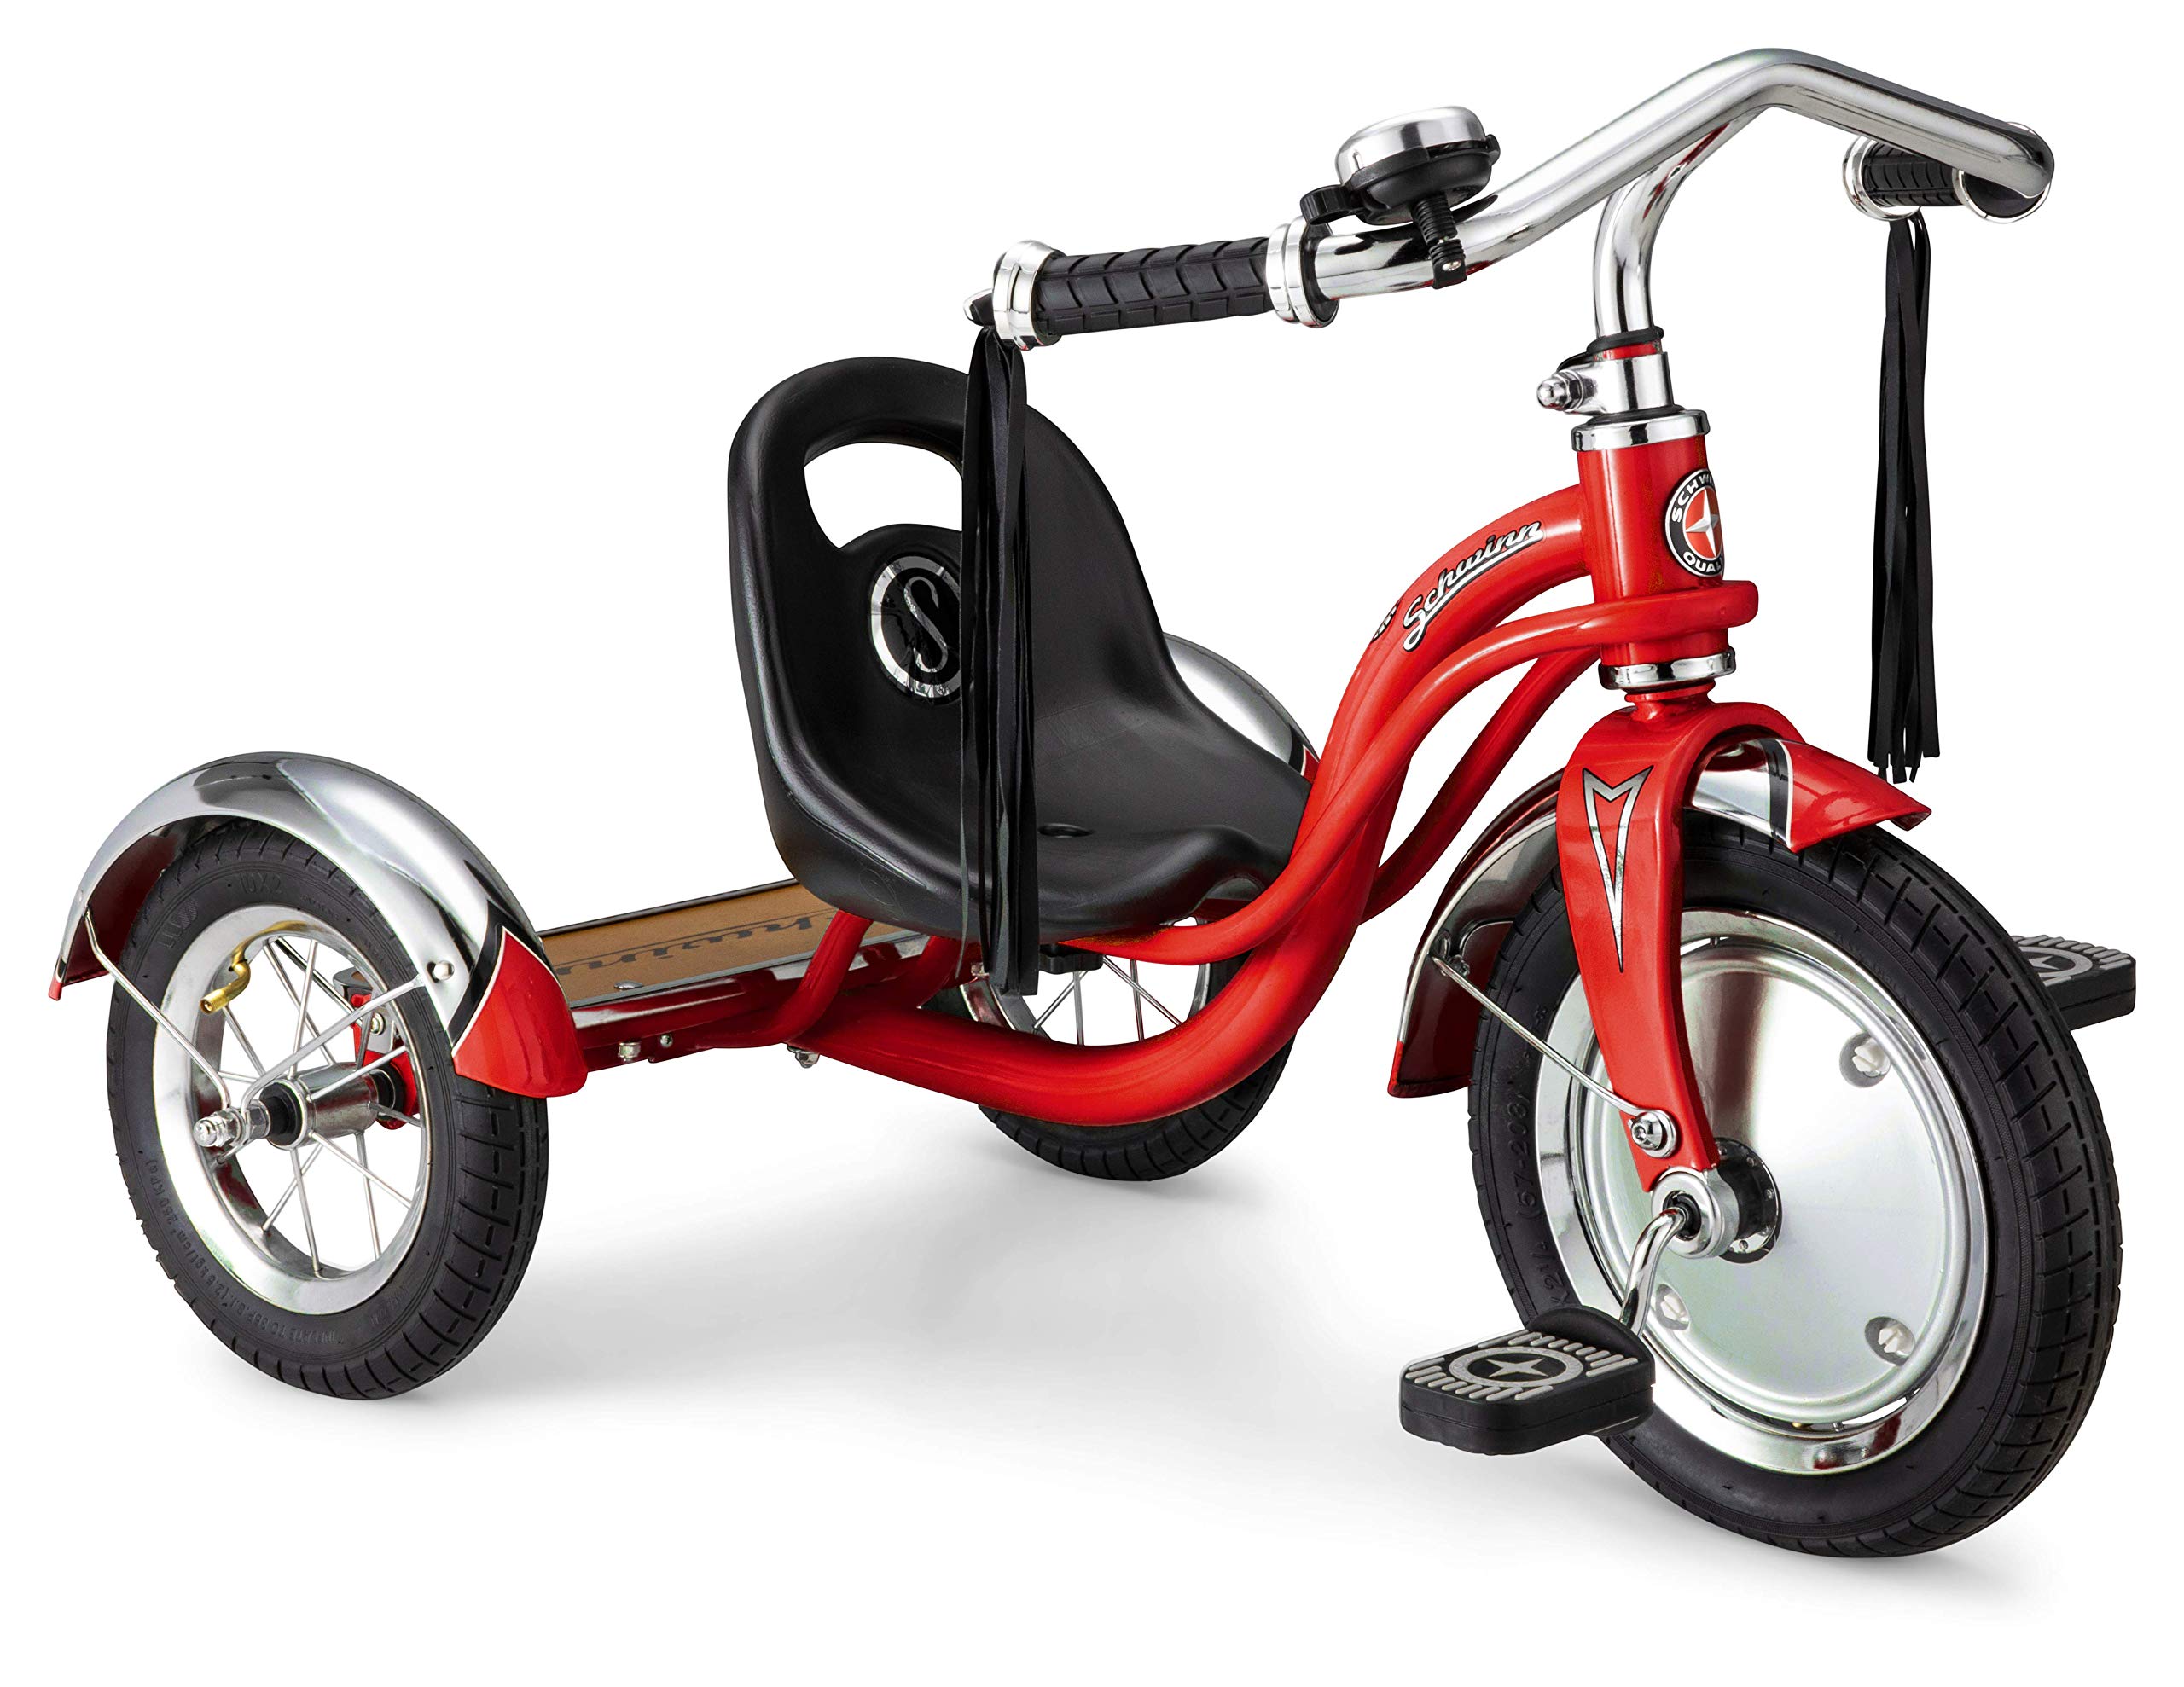 Schwinn Roadster Bike for Toddler, Kids Classic Tricycle, Low Positioned Steel Trike Frame with Bell and Handlebar Tassels, Rear Deck Made of Genuine Wood, for Boys and Girls Ages 2-4 Year Old, Red